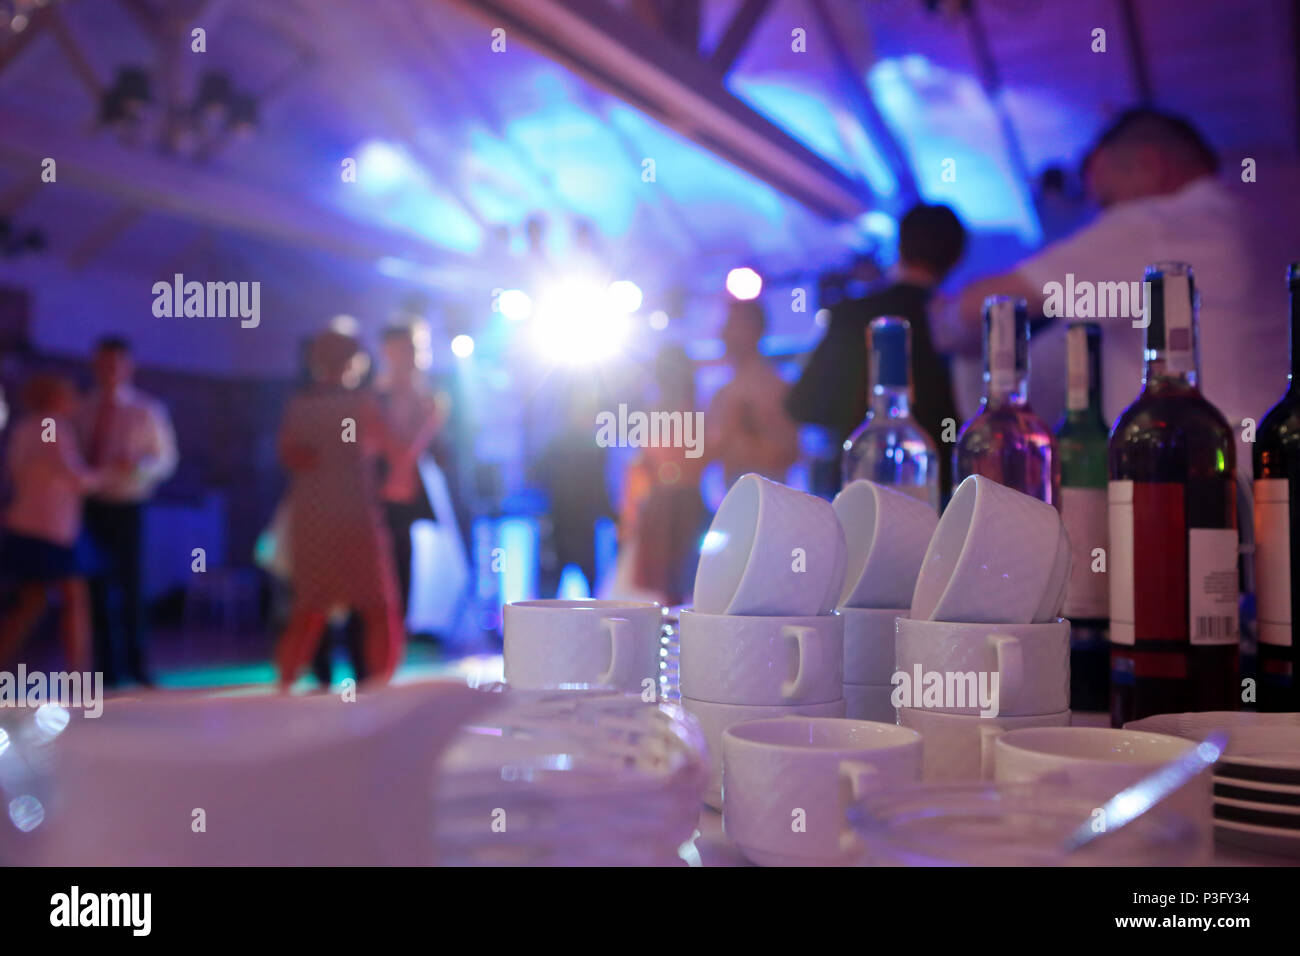 Dancing couples during party or wedding celebration Stock Photo - Alamy